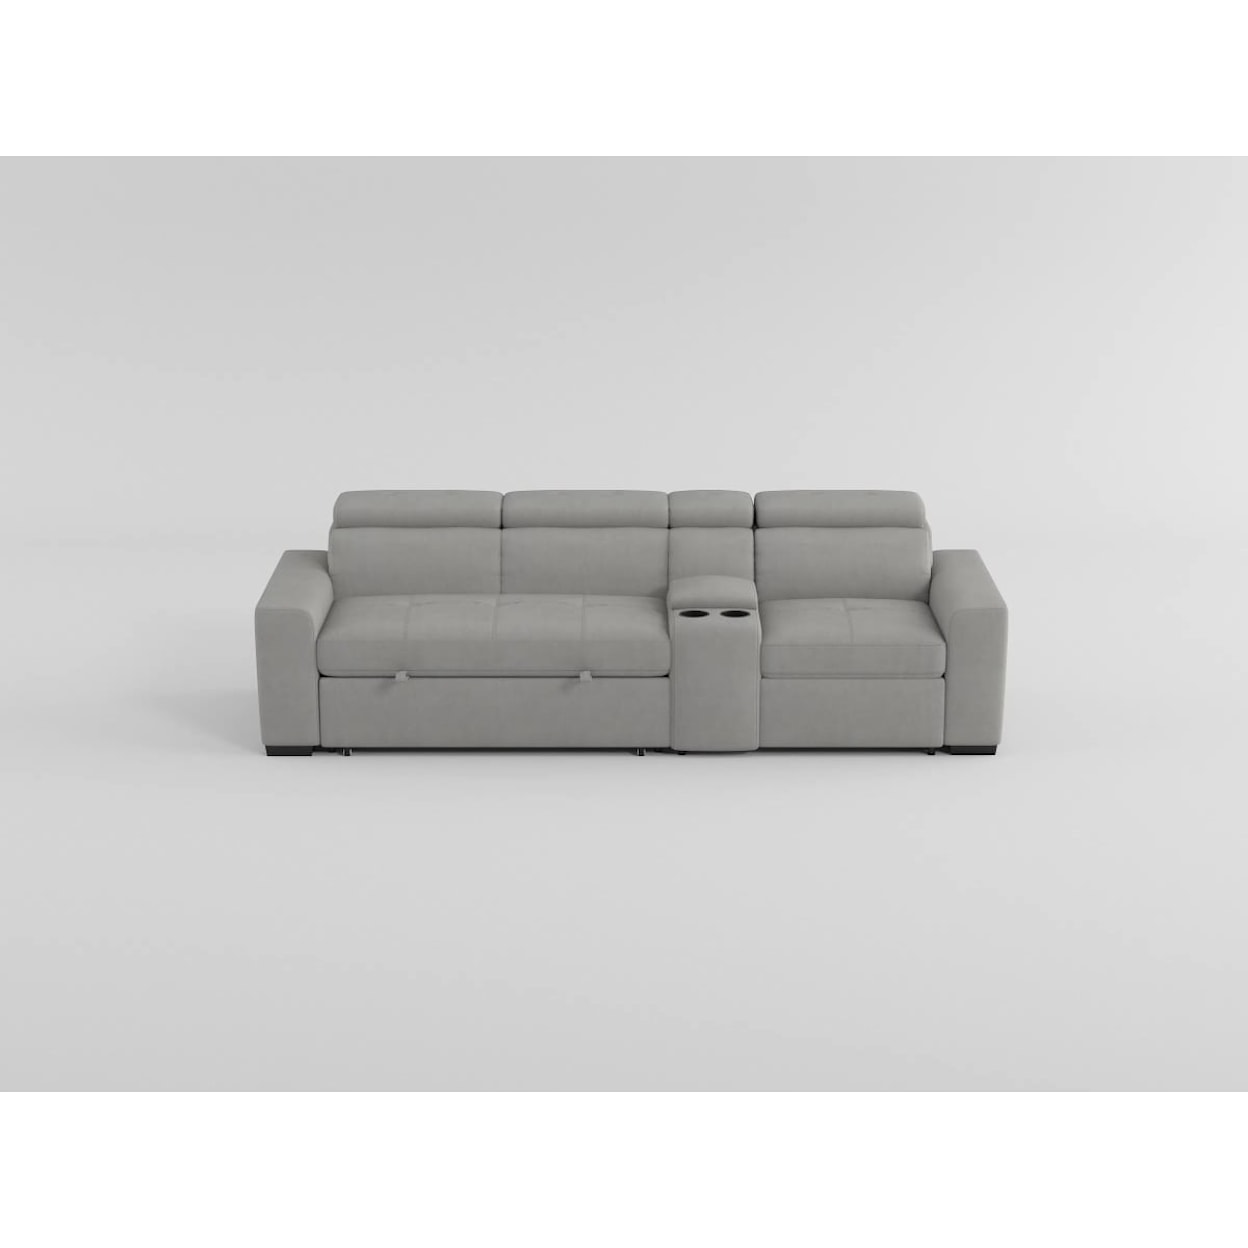 Homelegance Farrah 2-Piece Sofa with Right Console